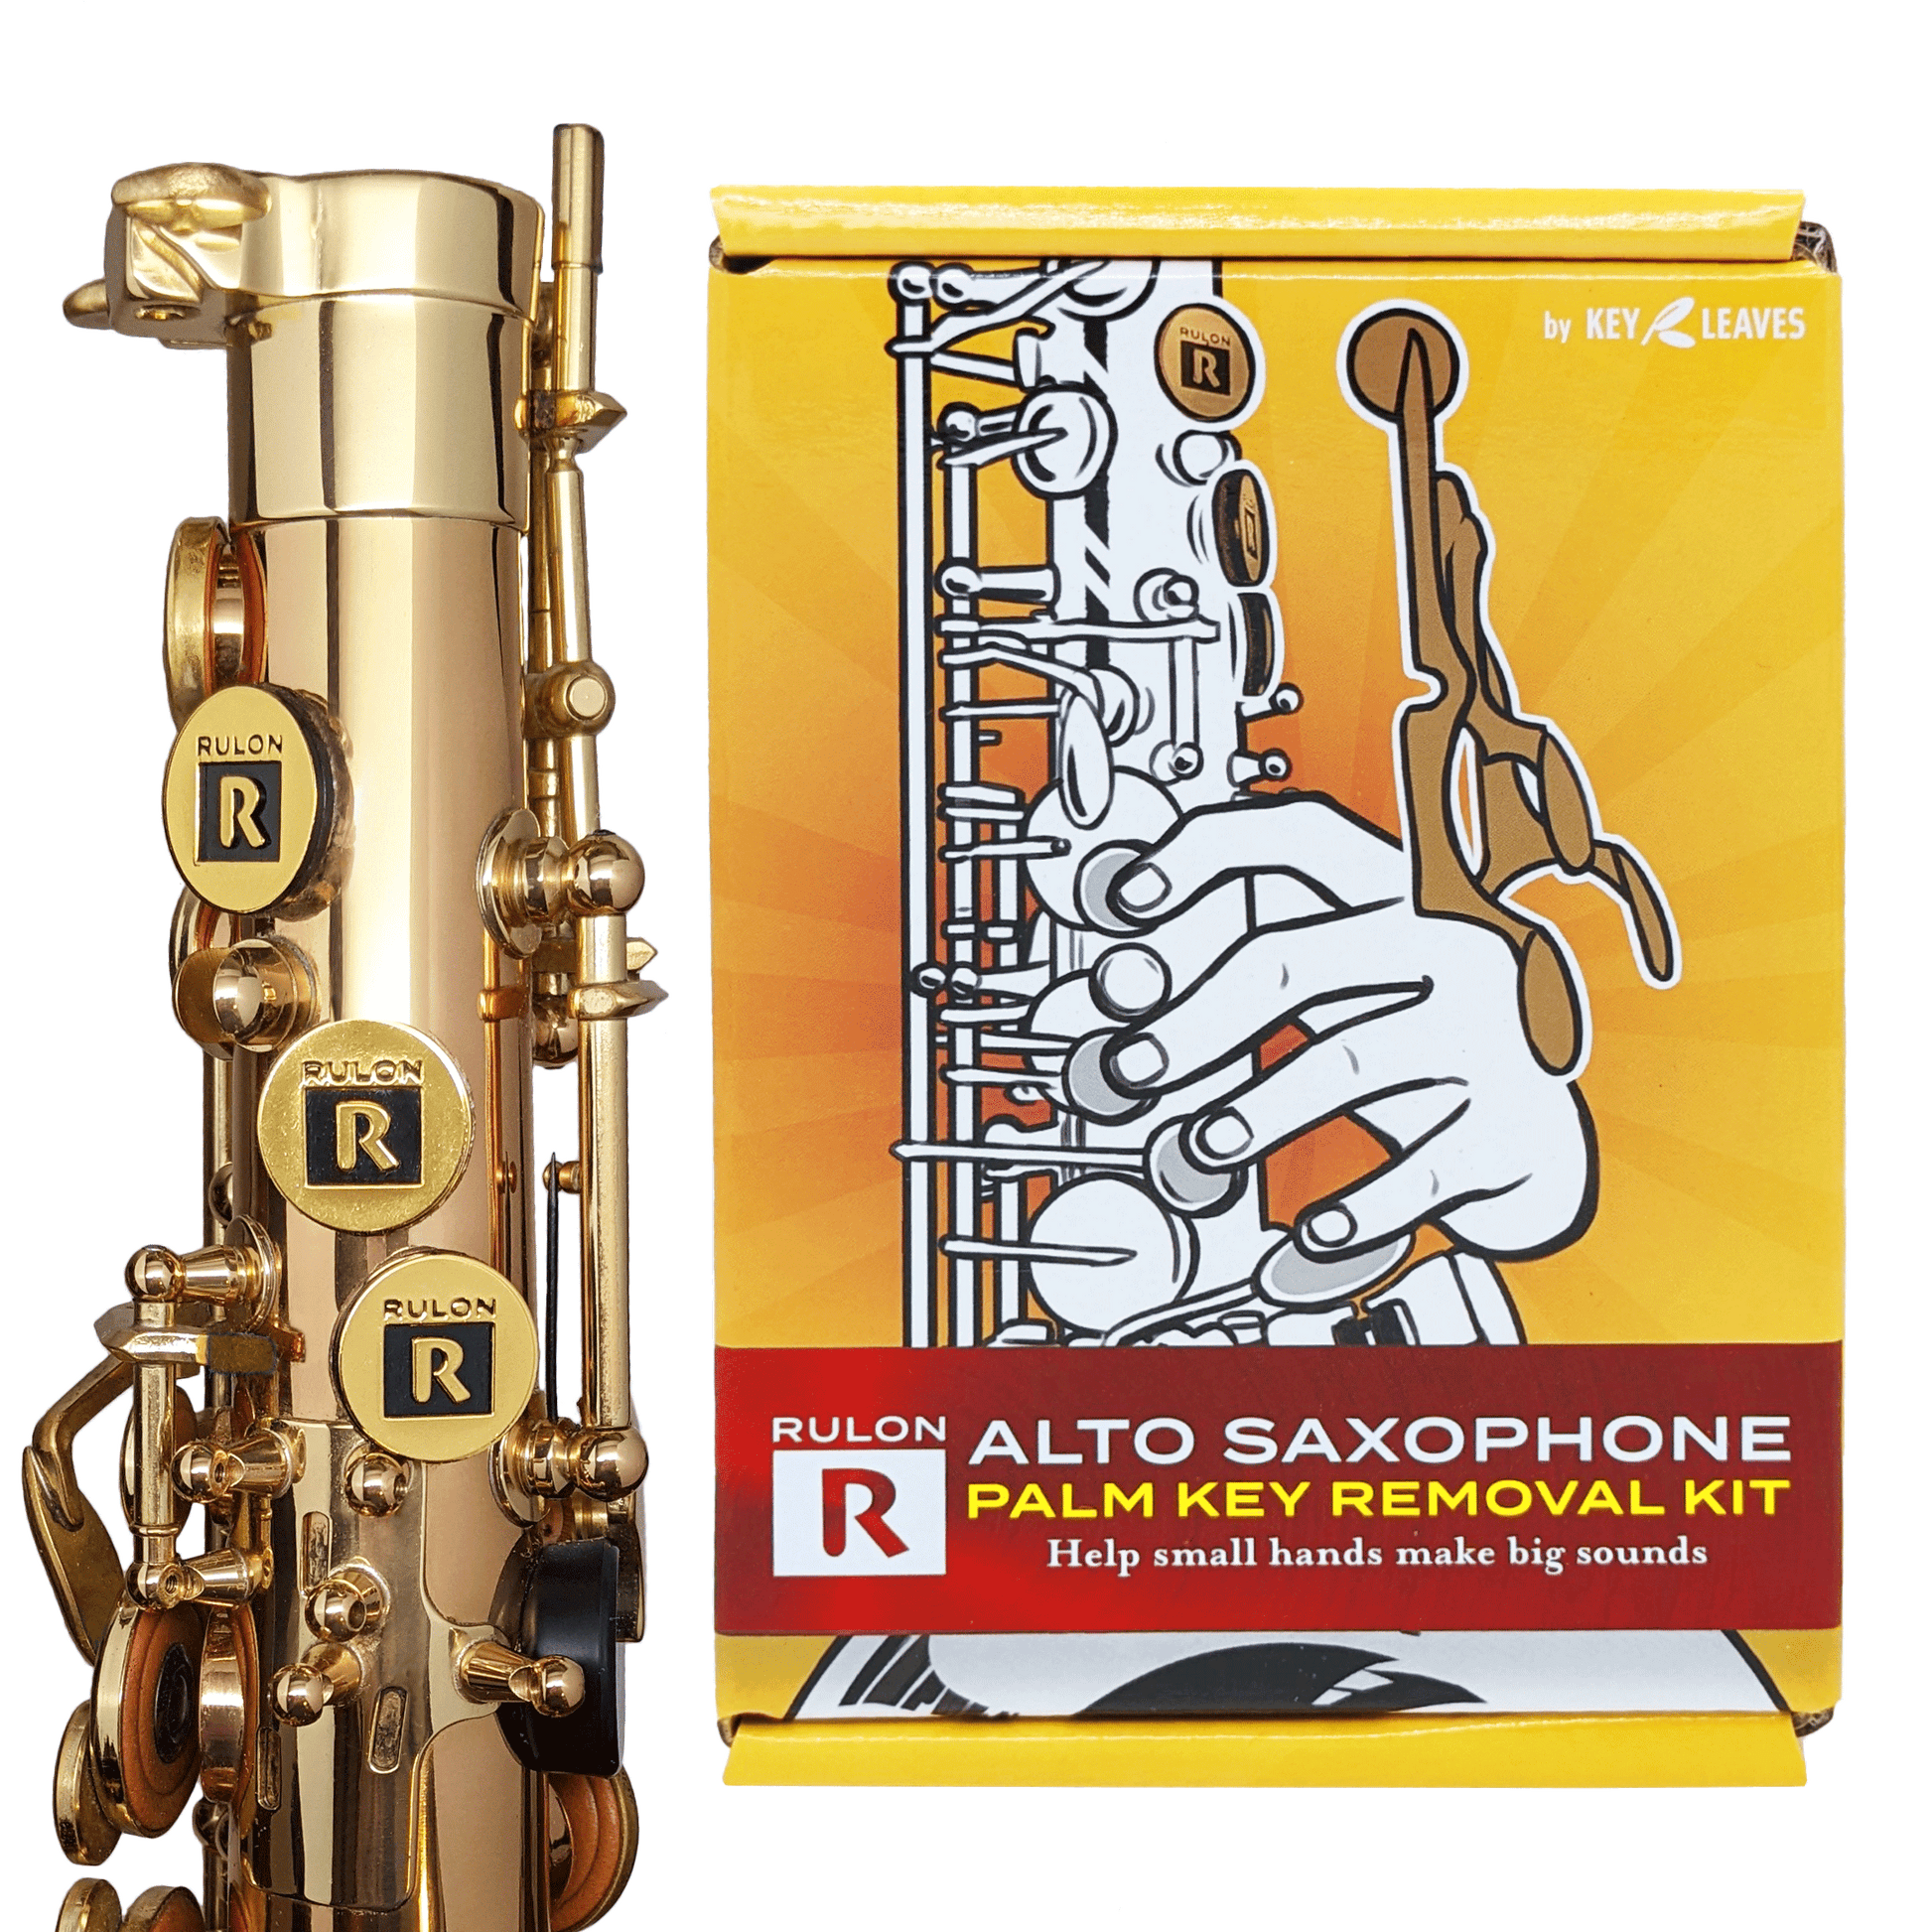 How to Buy the Best Saxophone for a Beginner – Saxophone Price